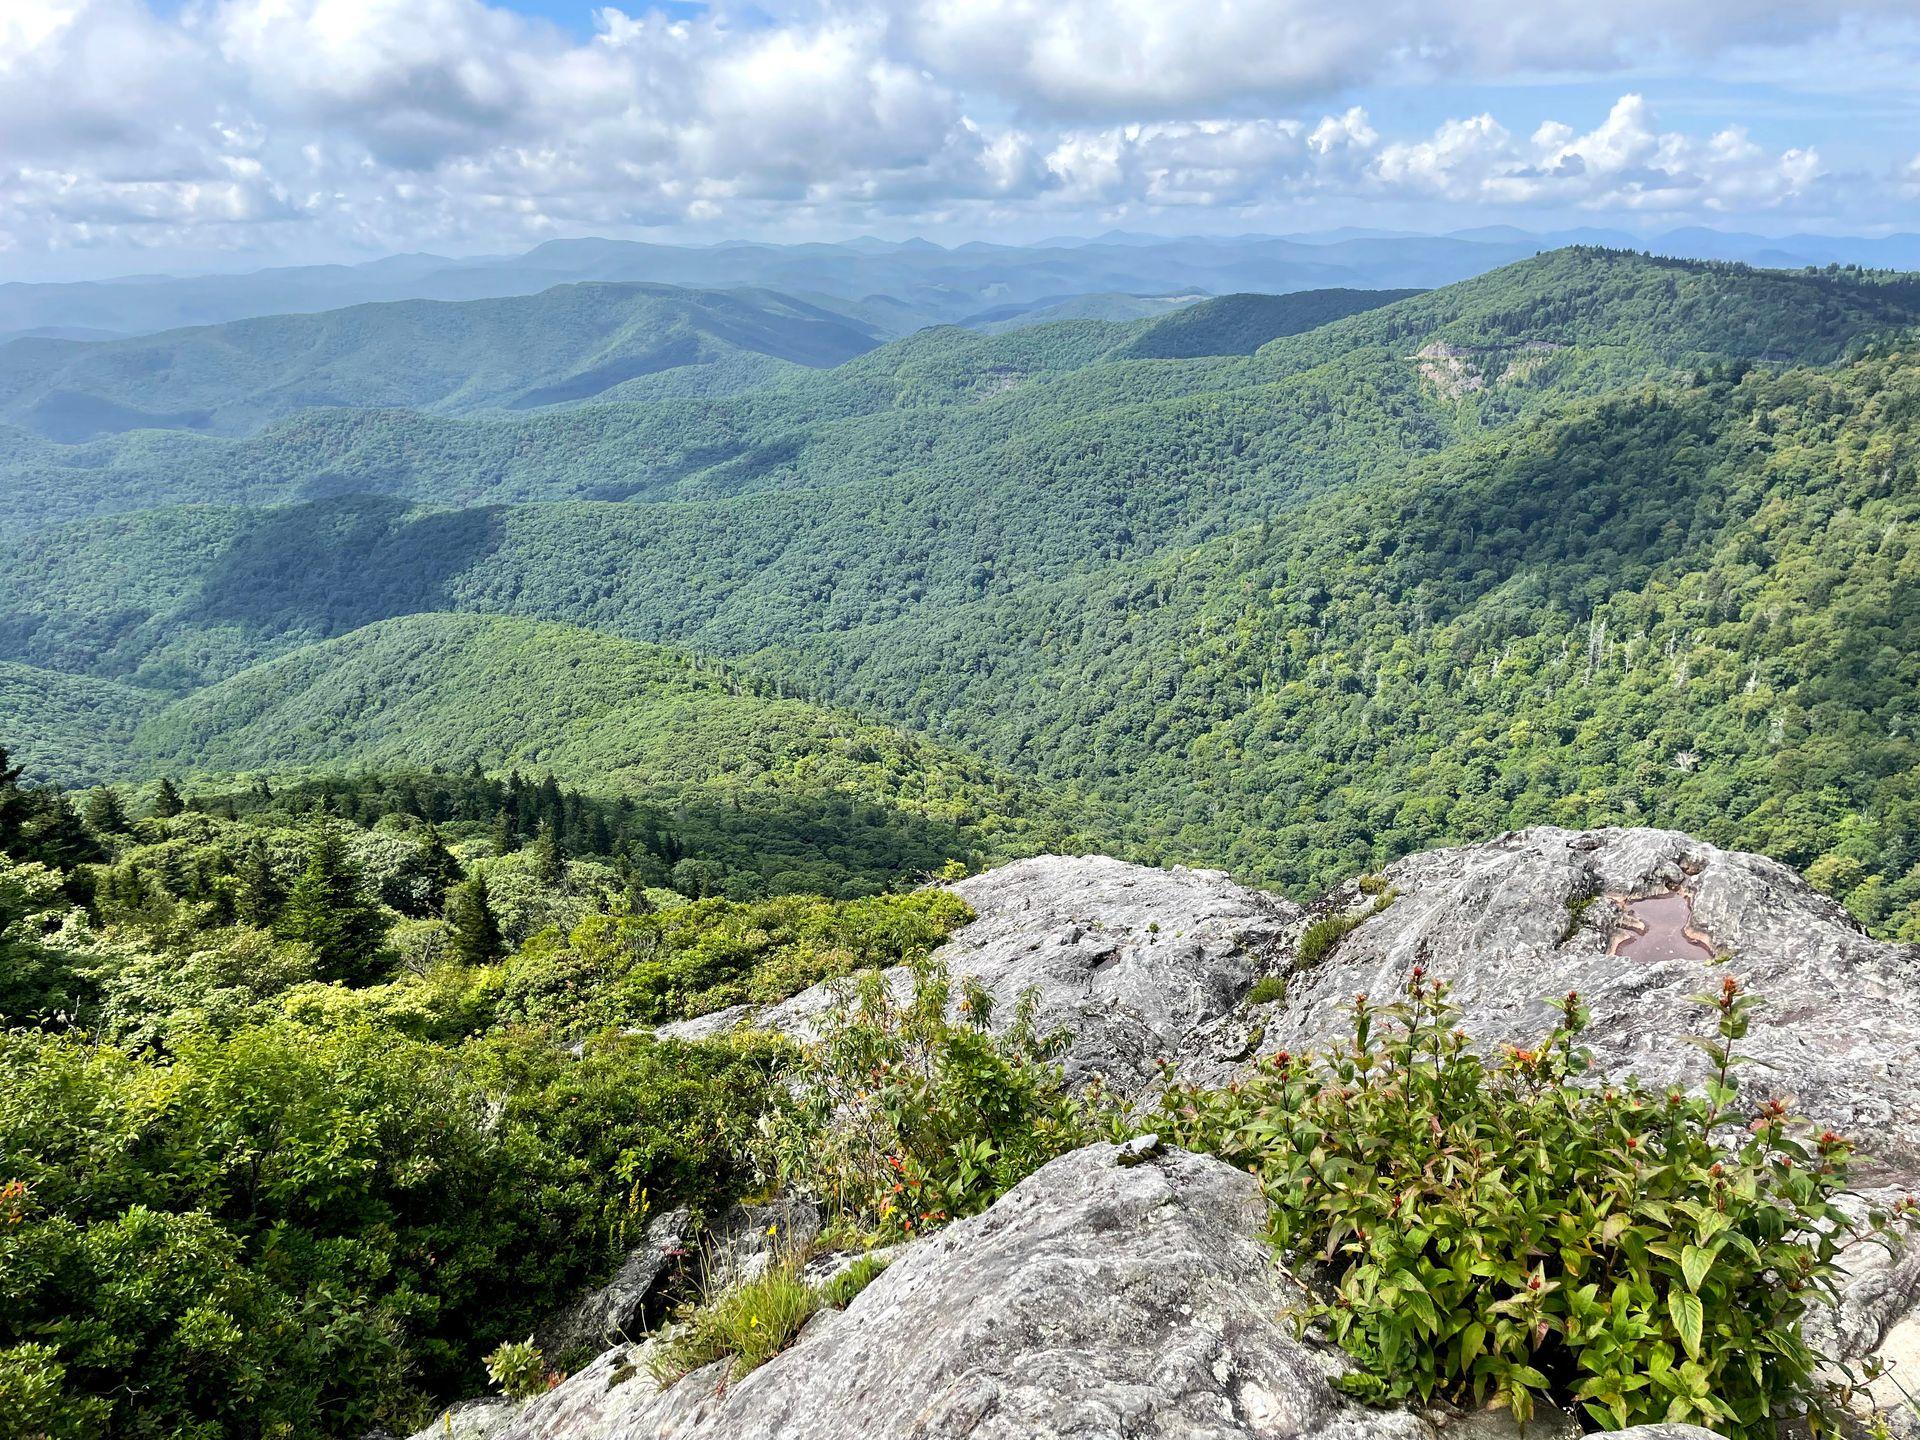 An expansive view of mountains covered in green trees from the Devil's Courthouse trail.